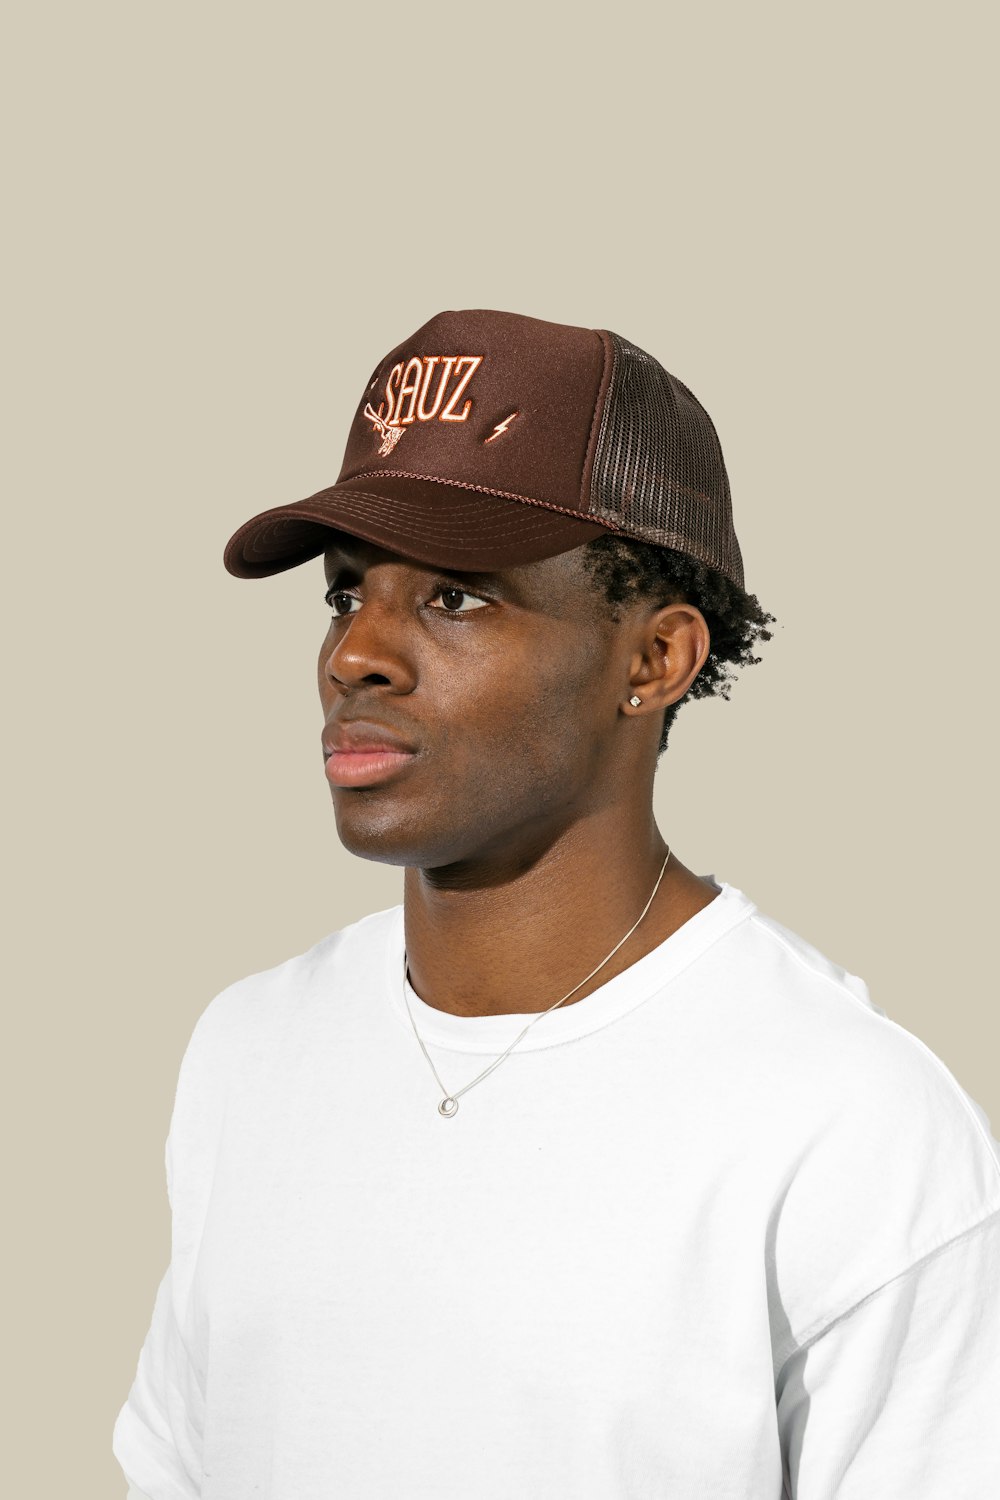 a man wearing a brown hat and white shirt